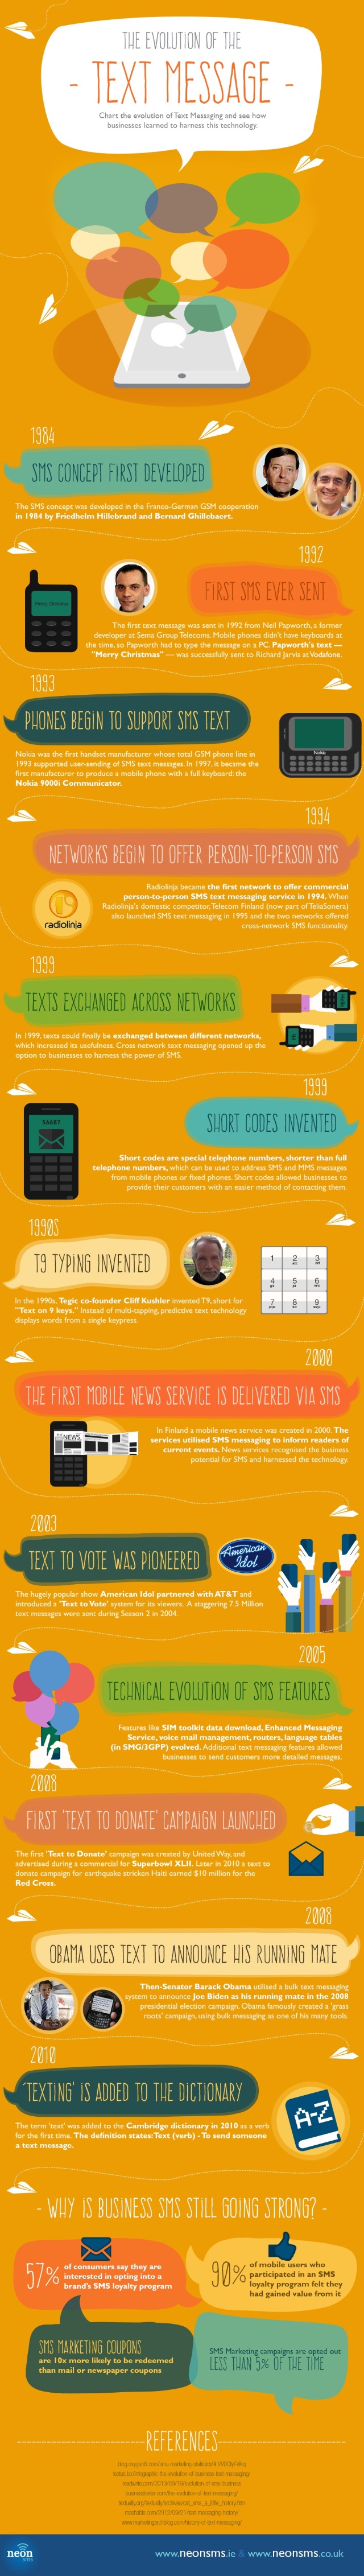 SMS infographic